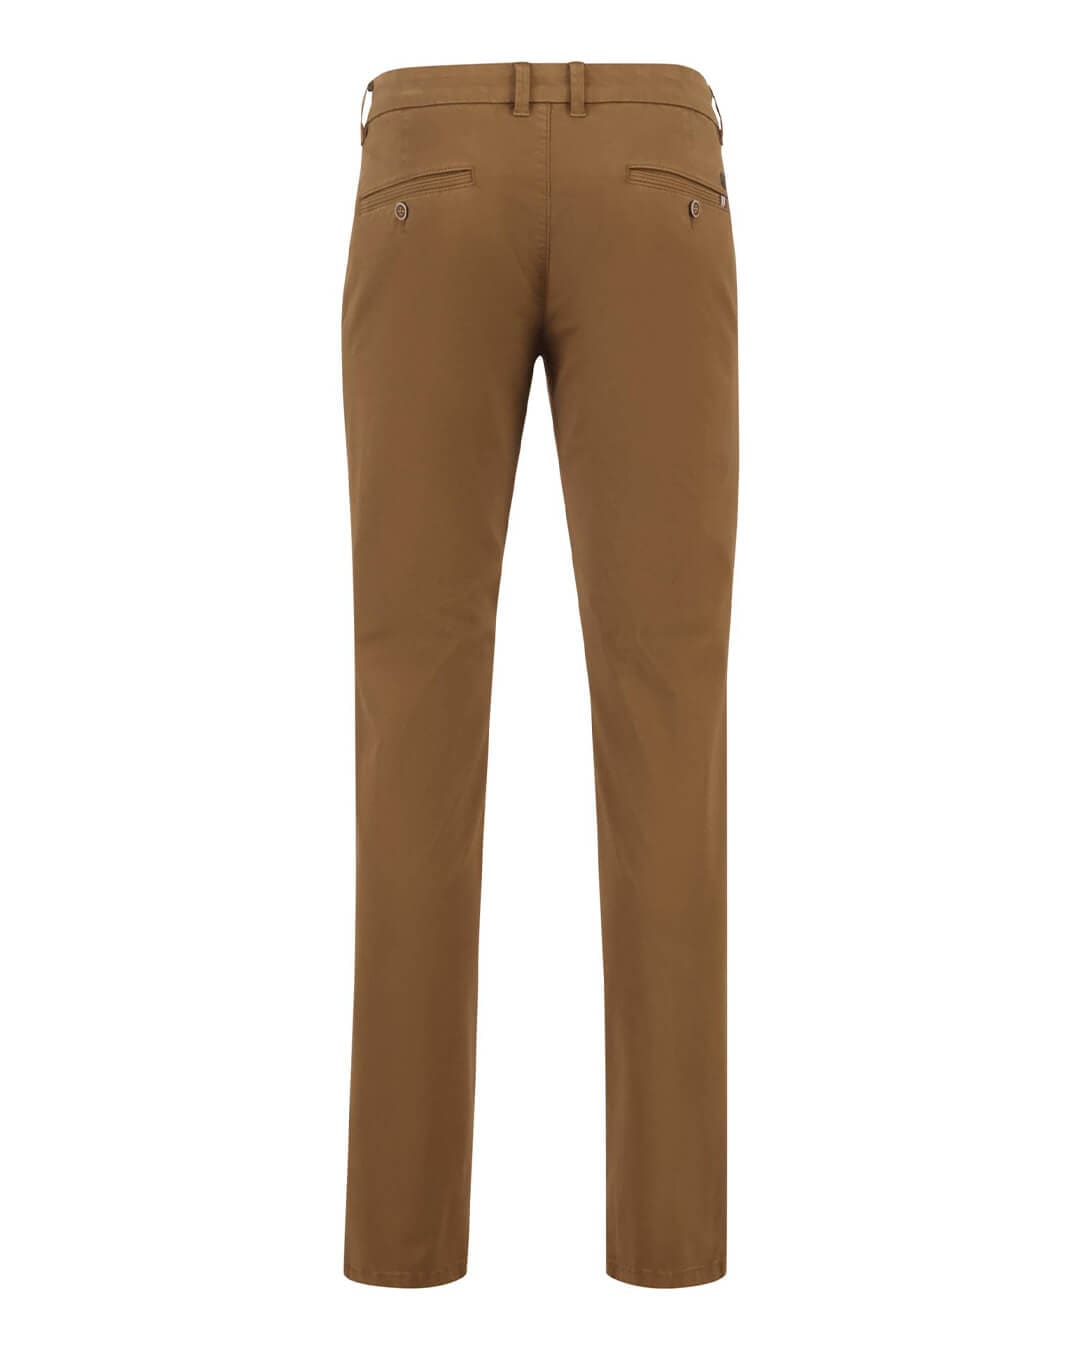 Fynch-Hatton Trousers Fynch-Hatton Seasonal Brown Cotton Stretch Chino Trousers